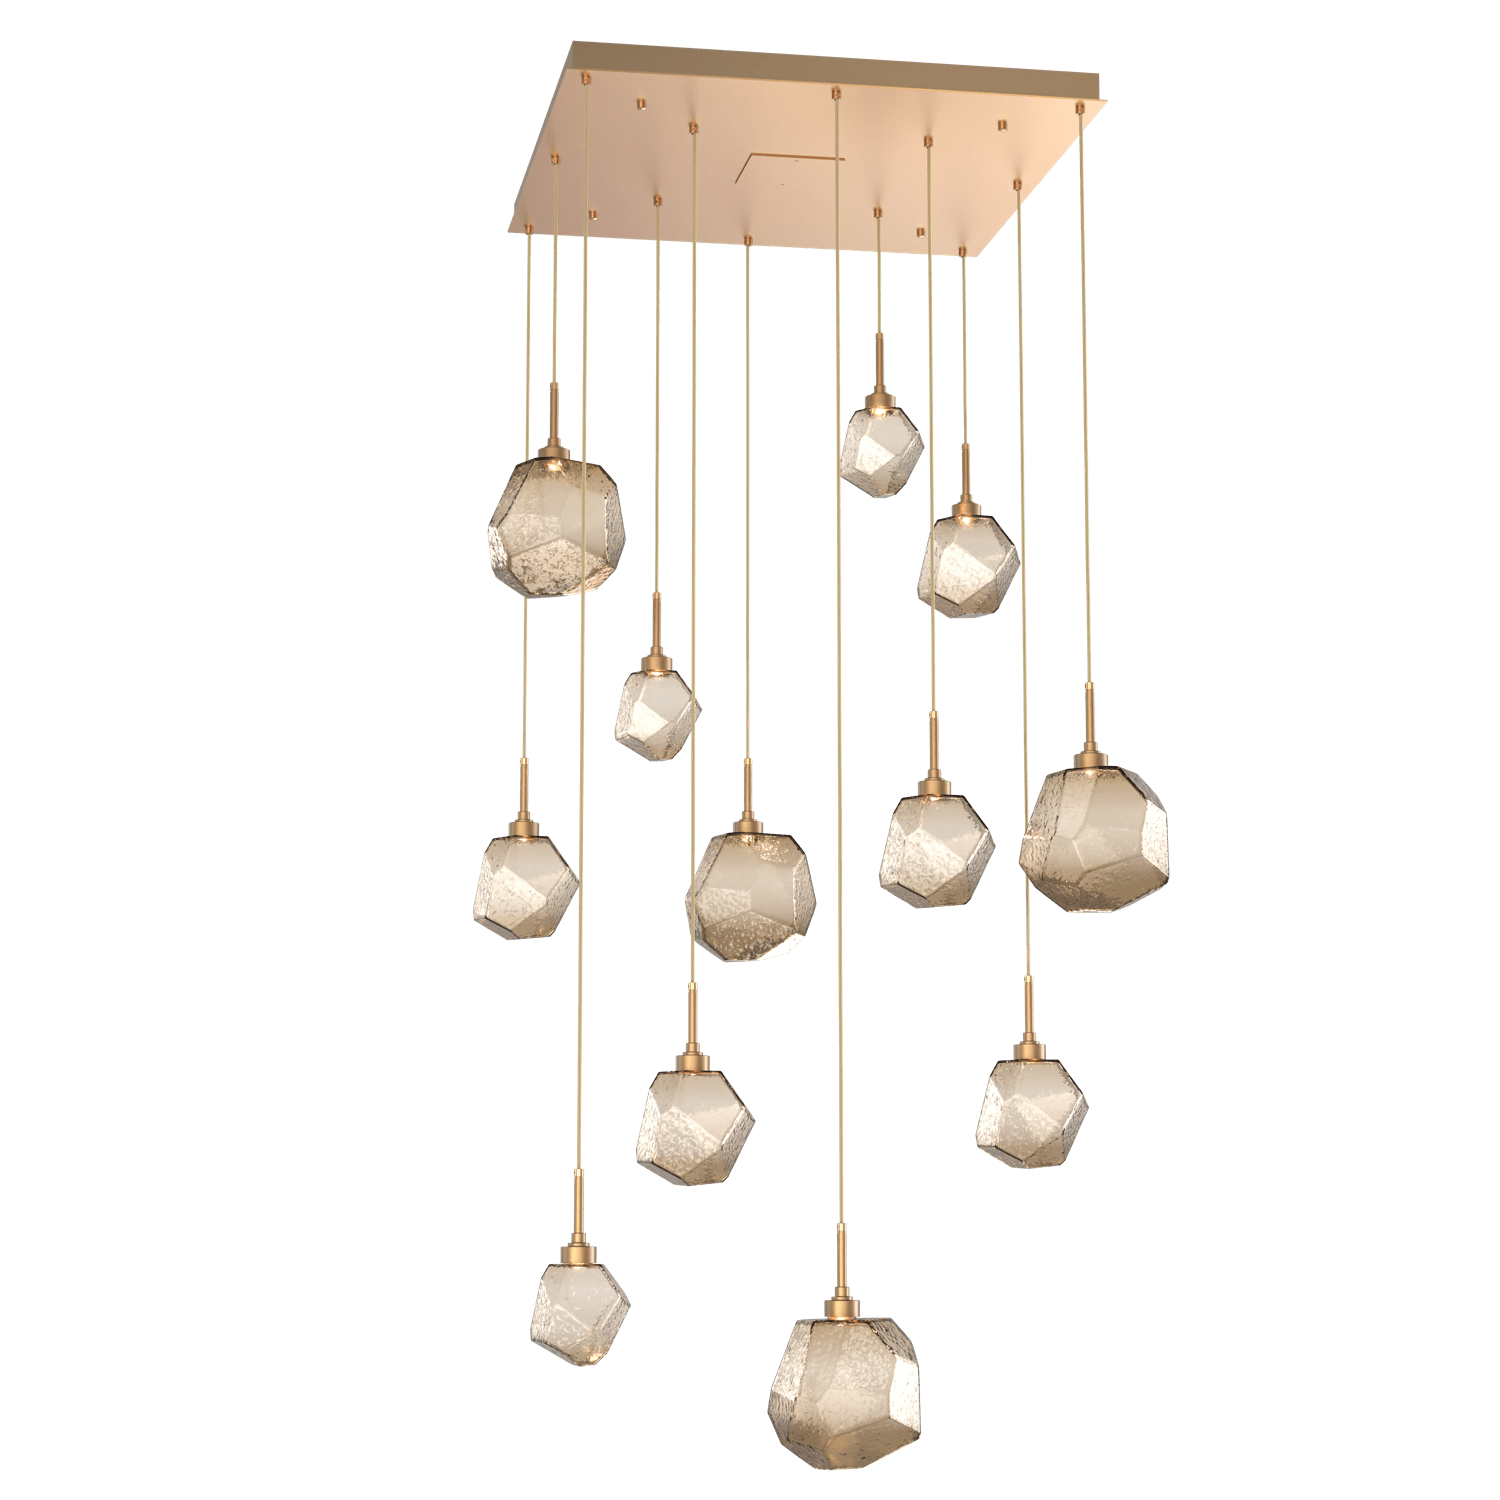 CHB0039-12-NB-B-Hammerton-Studio-Gem-12-light-square-pendant-chandelier-with-novel-brass-finish-and-bronze-blown-glass-shades-and-LED-lamping